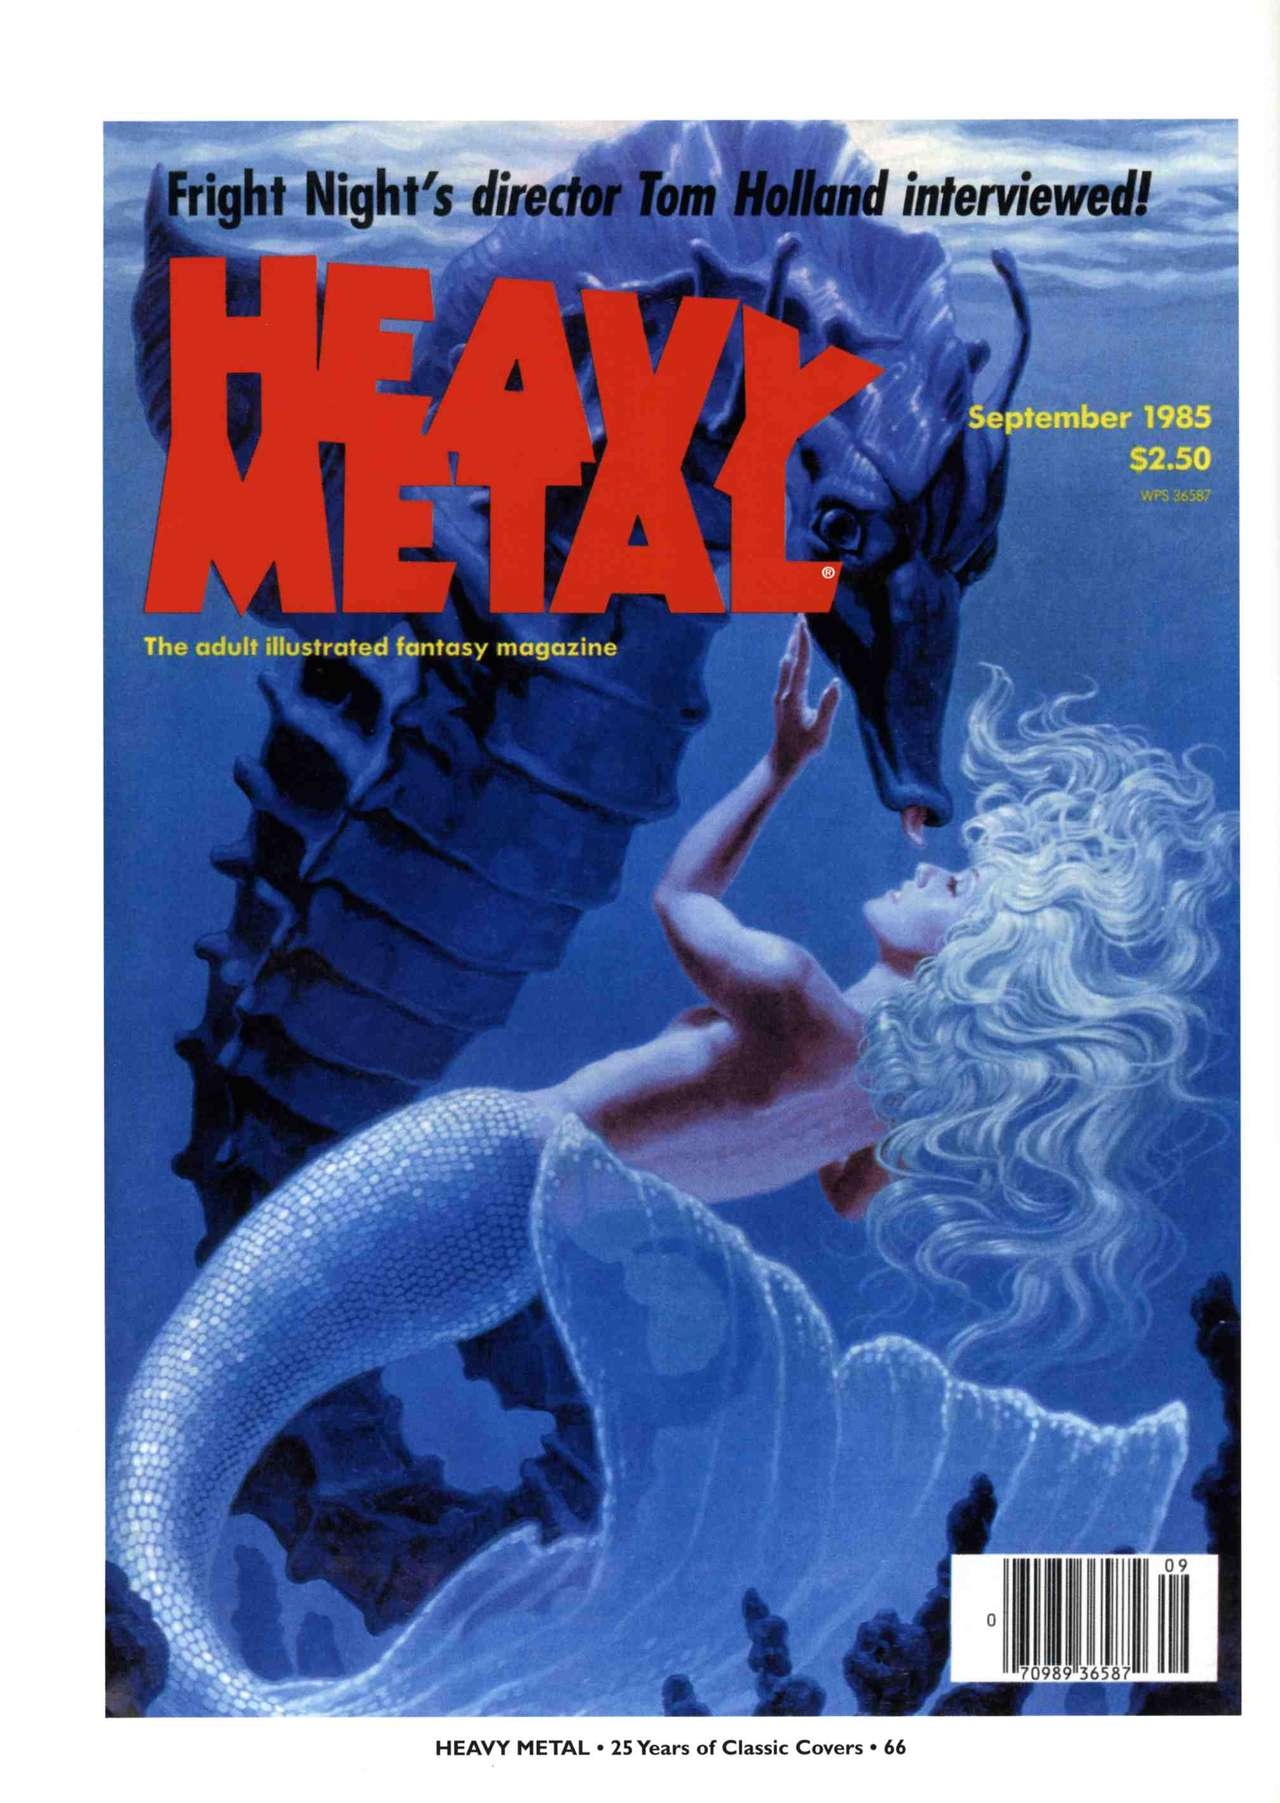 HEAVY METAL 25 Years of Classic Covers 71